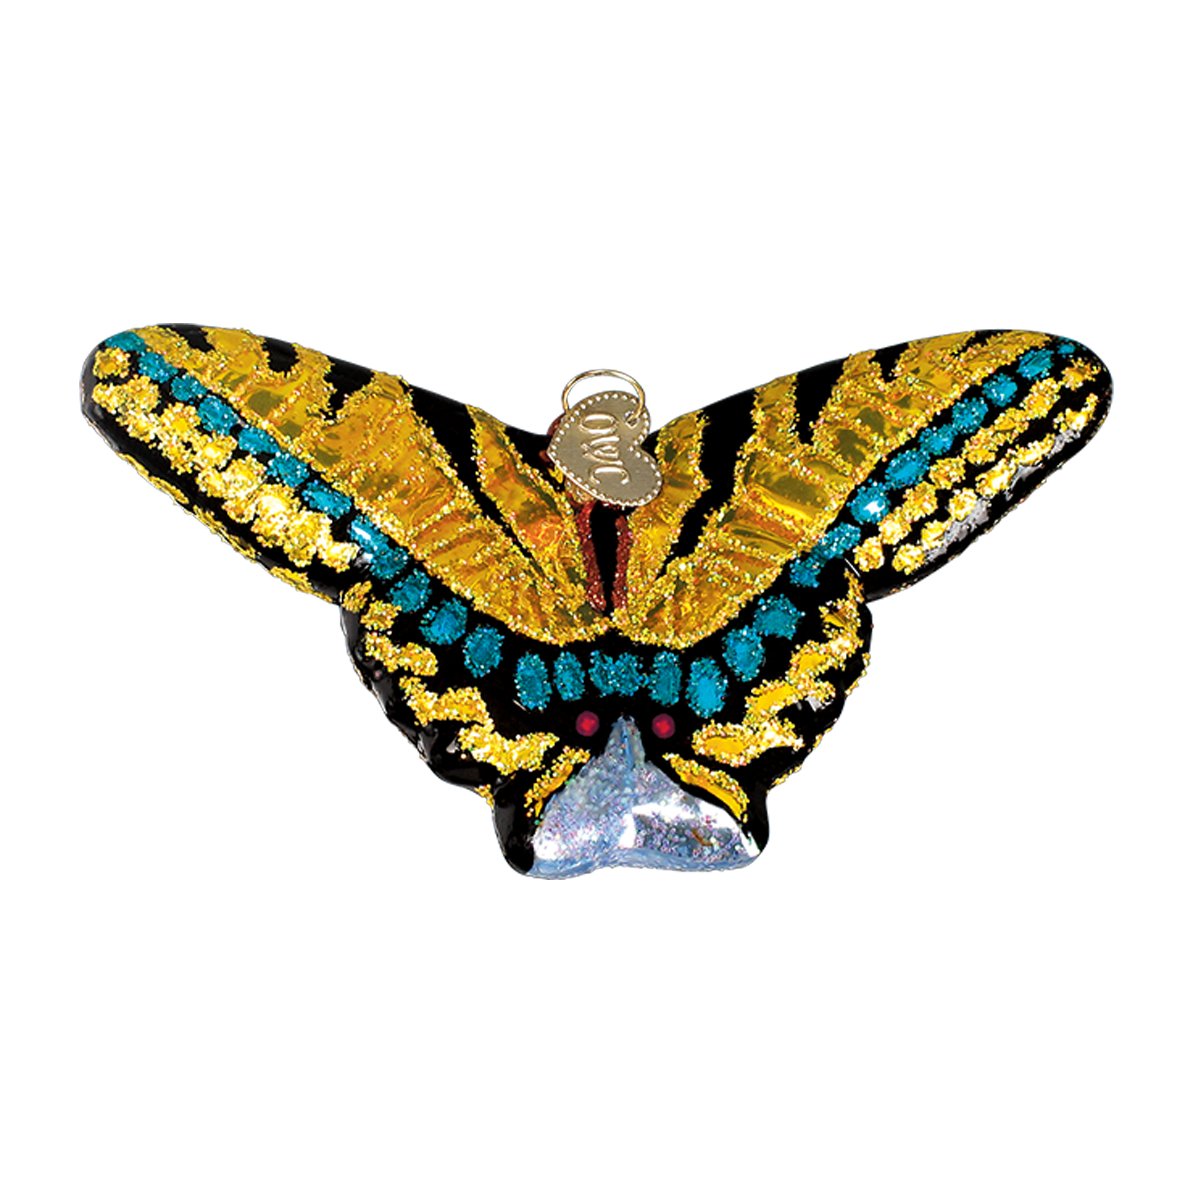 Swallowtail Butterfly Ornament